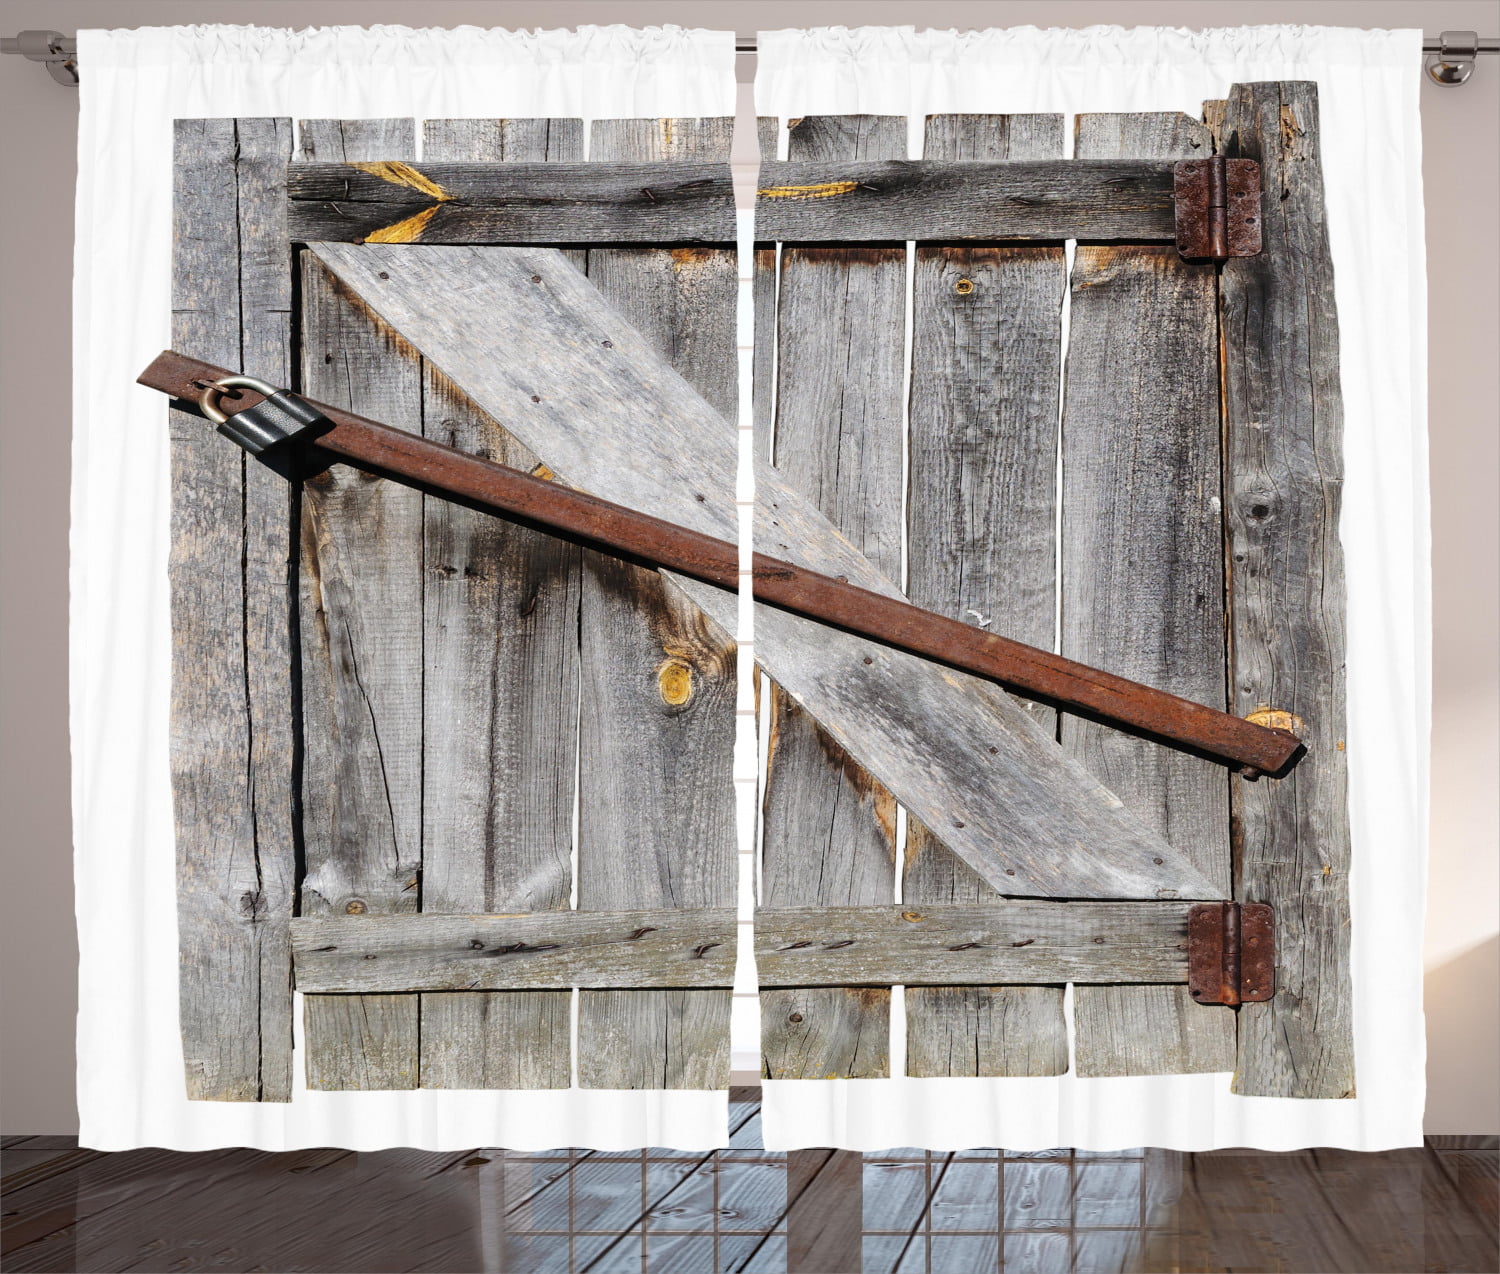 Details about   Rustic Window Curtains Wooden Barn Door Farmhouse Rural Art Architecture 